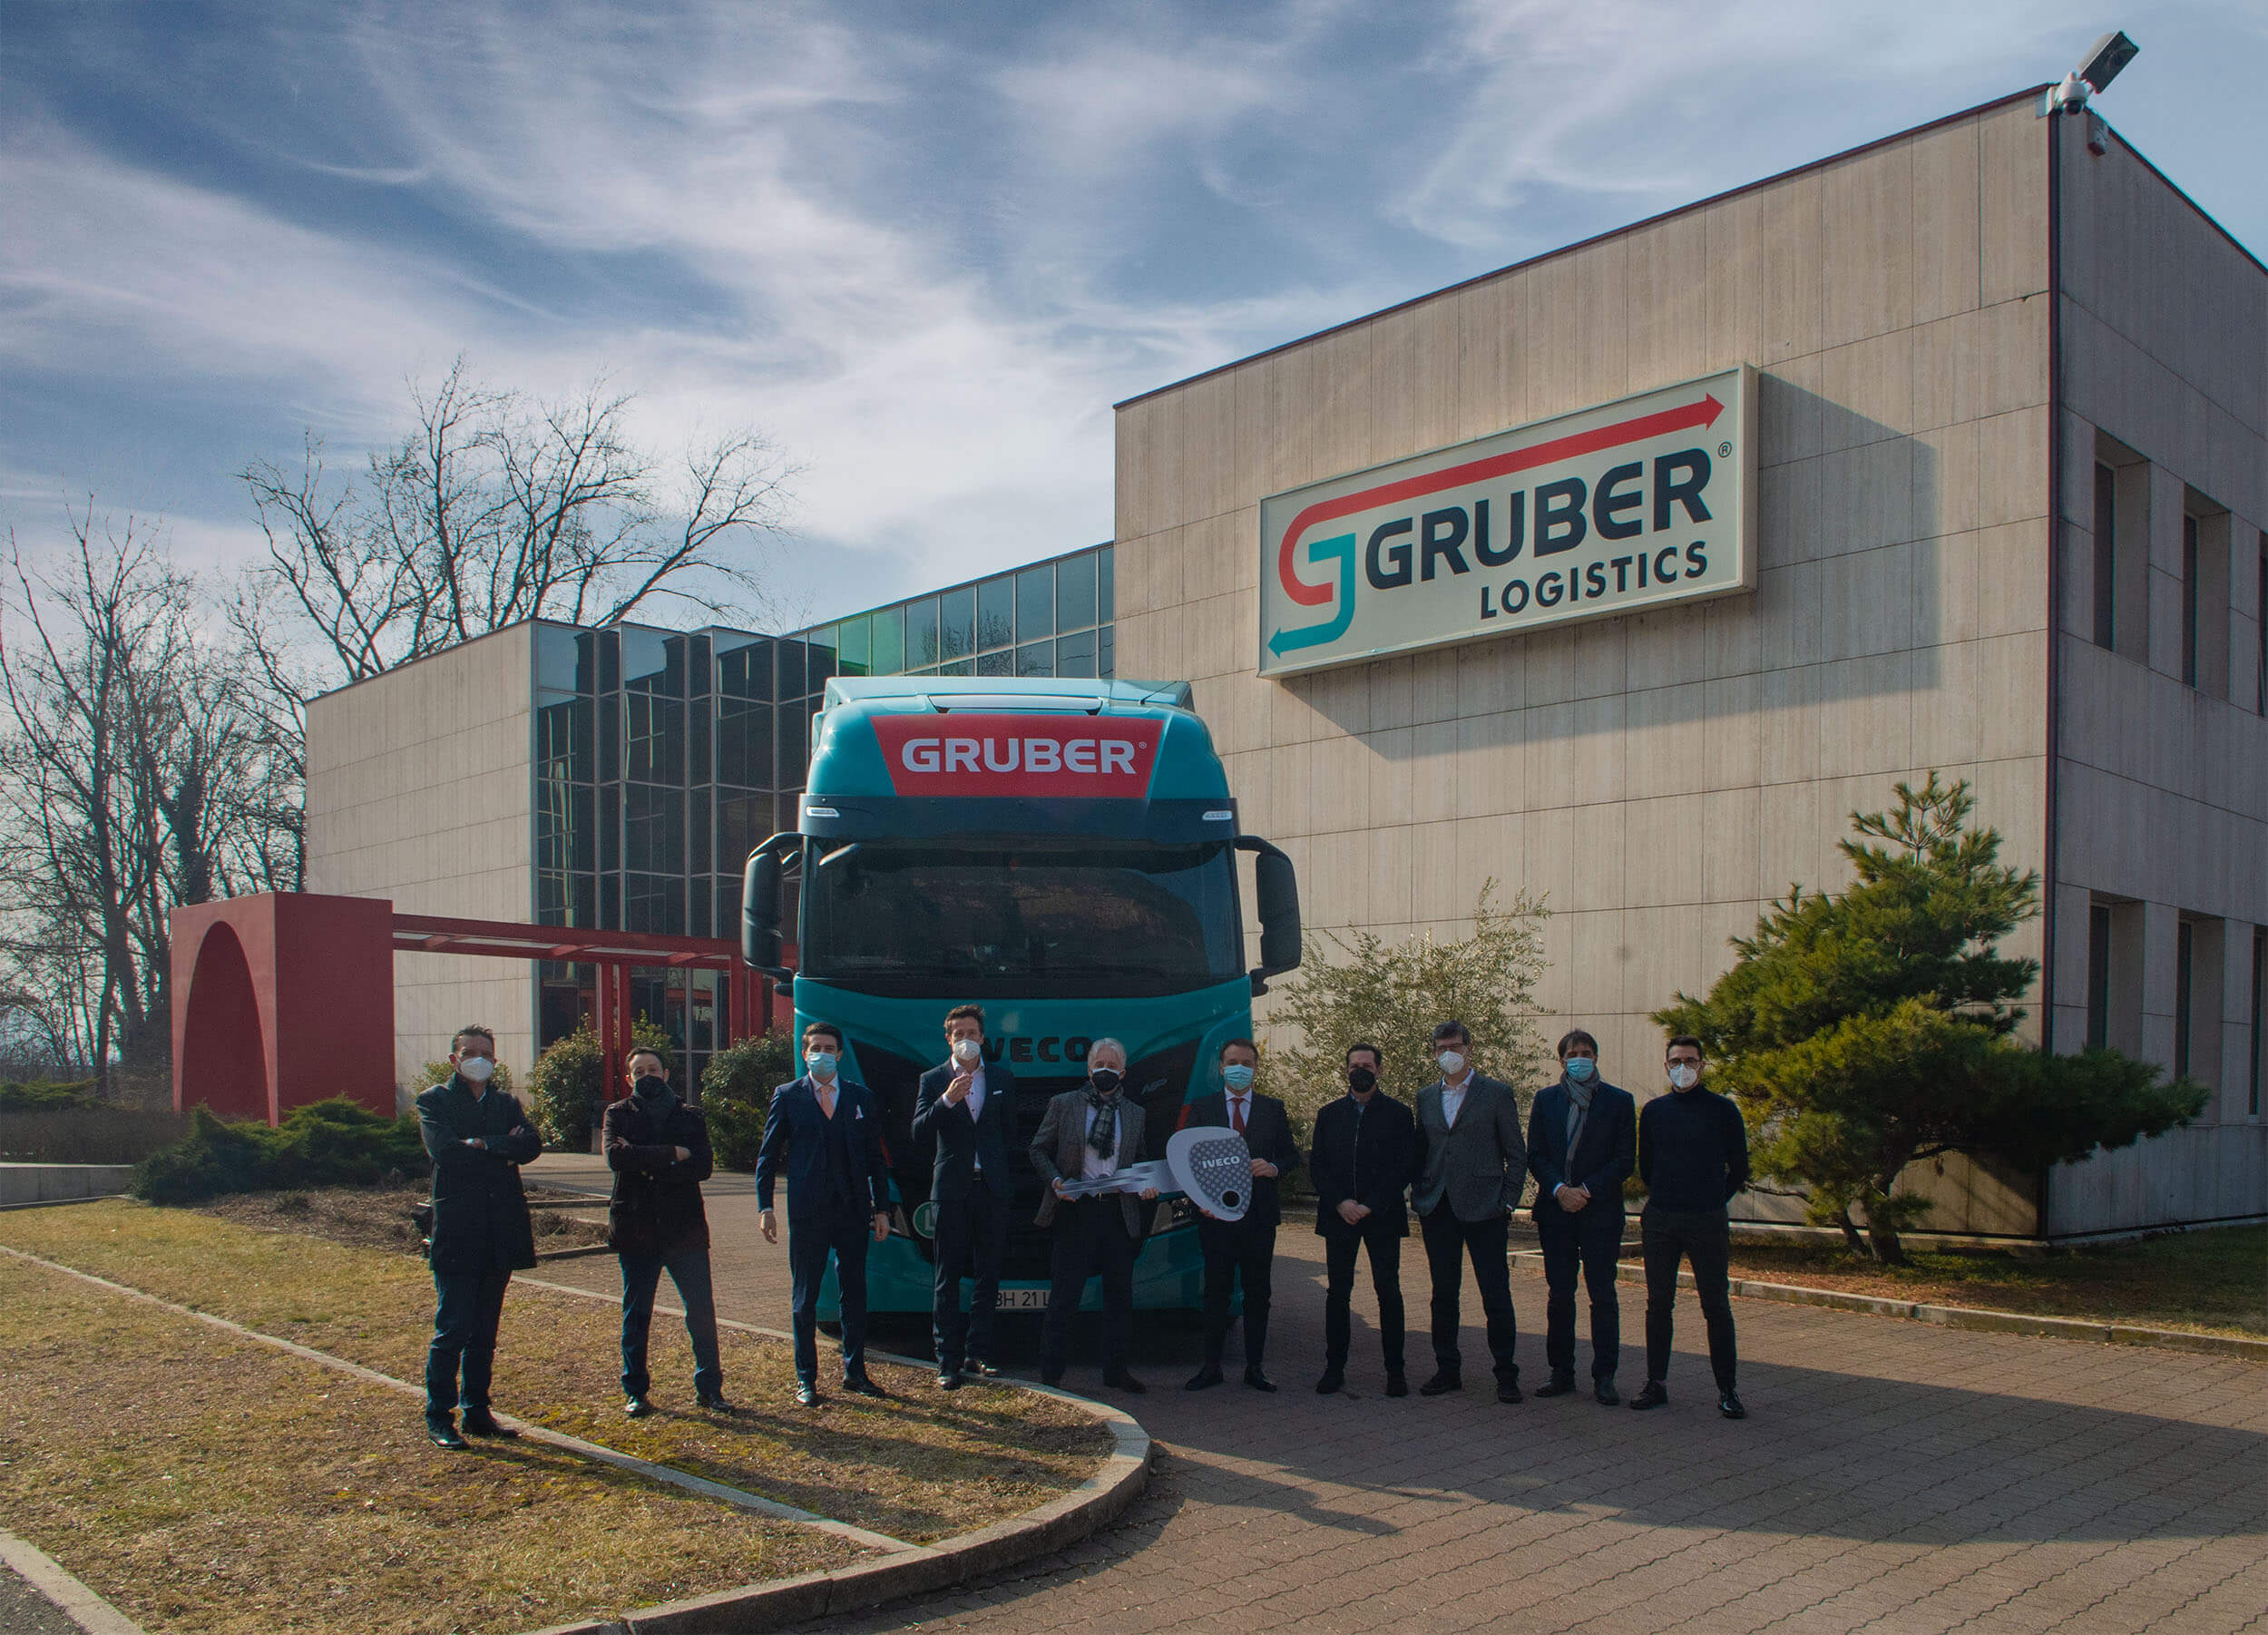 IVECO and Gruber Logistics with fleet of IVECO S-Way LNG trucks for sustainable transport